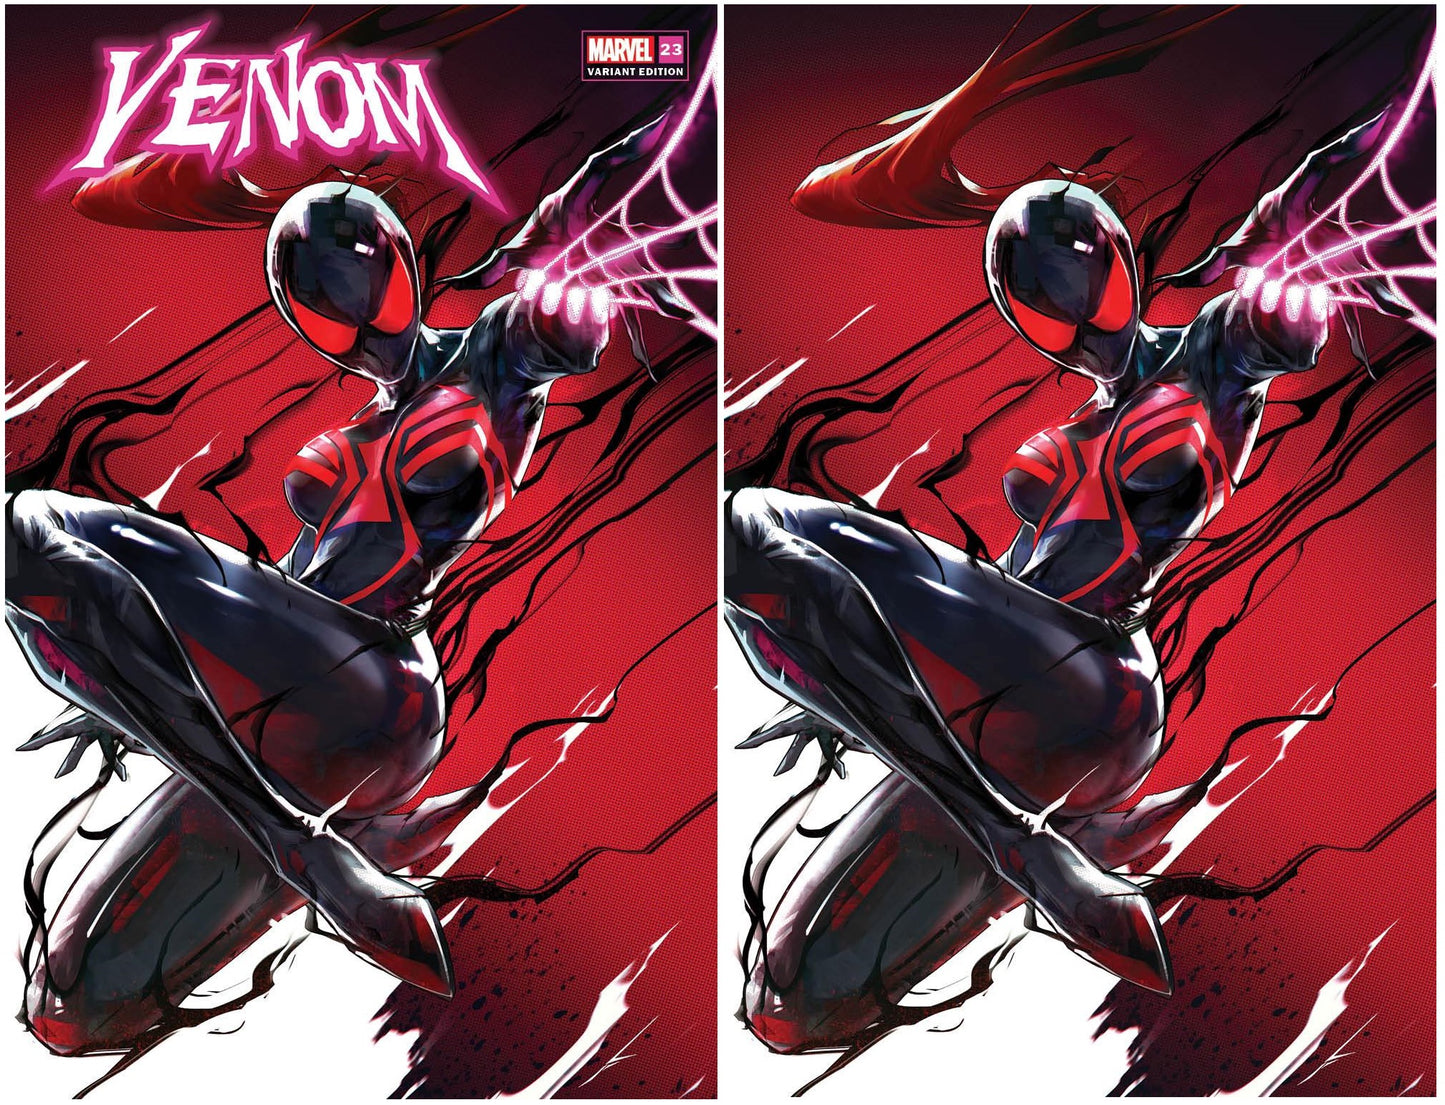 VENOM #23 IVAN TAO SPOILER TRADE/VIRGIN VARIANT SET LIMITED TO 400 SETS WITH NUMBERED COA